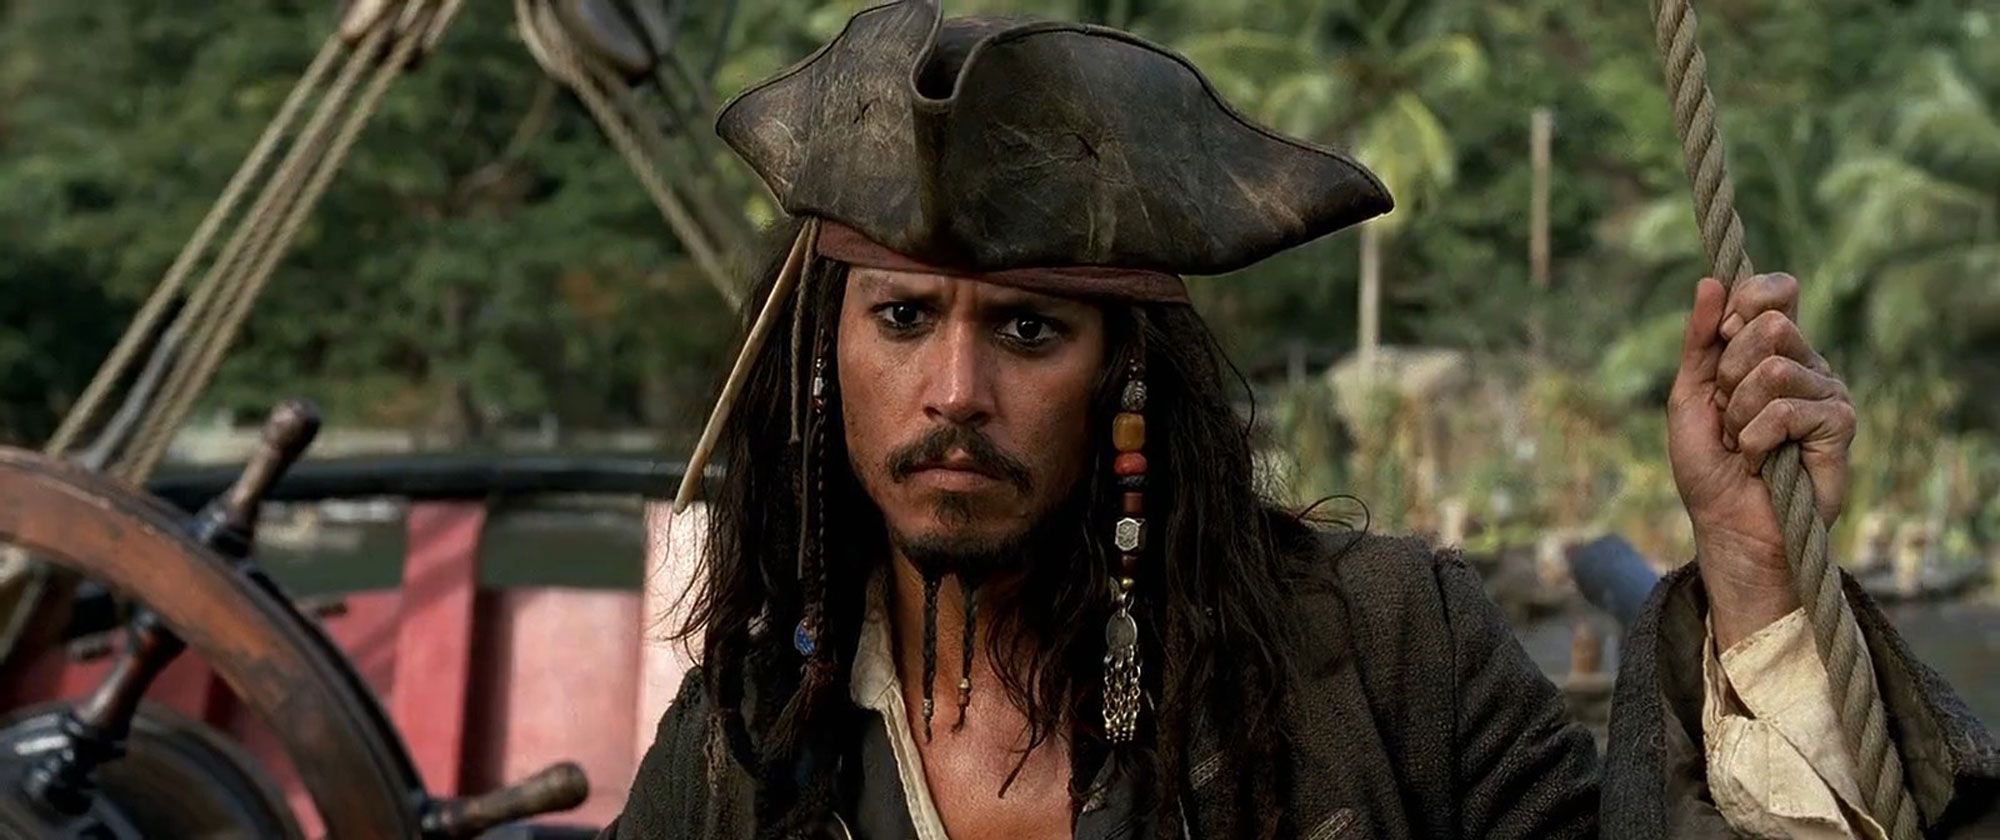 The Pirates Of The Caribbean Series